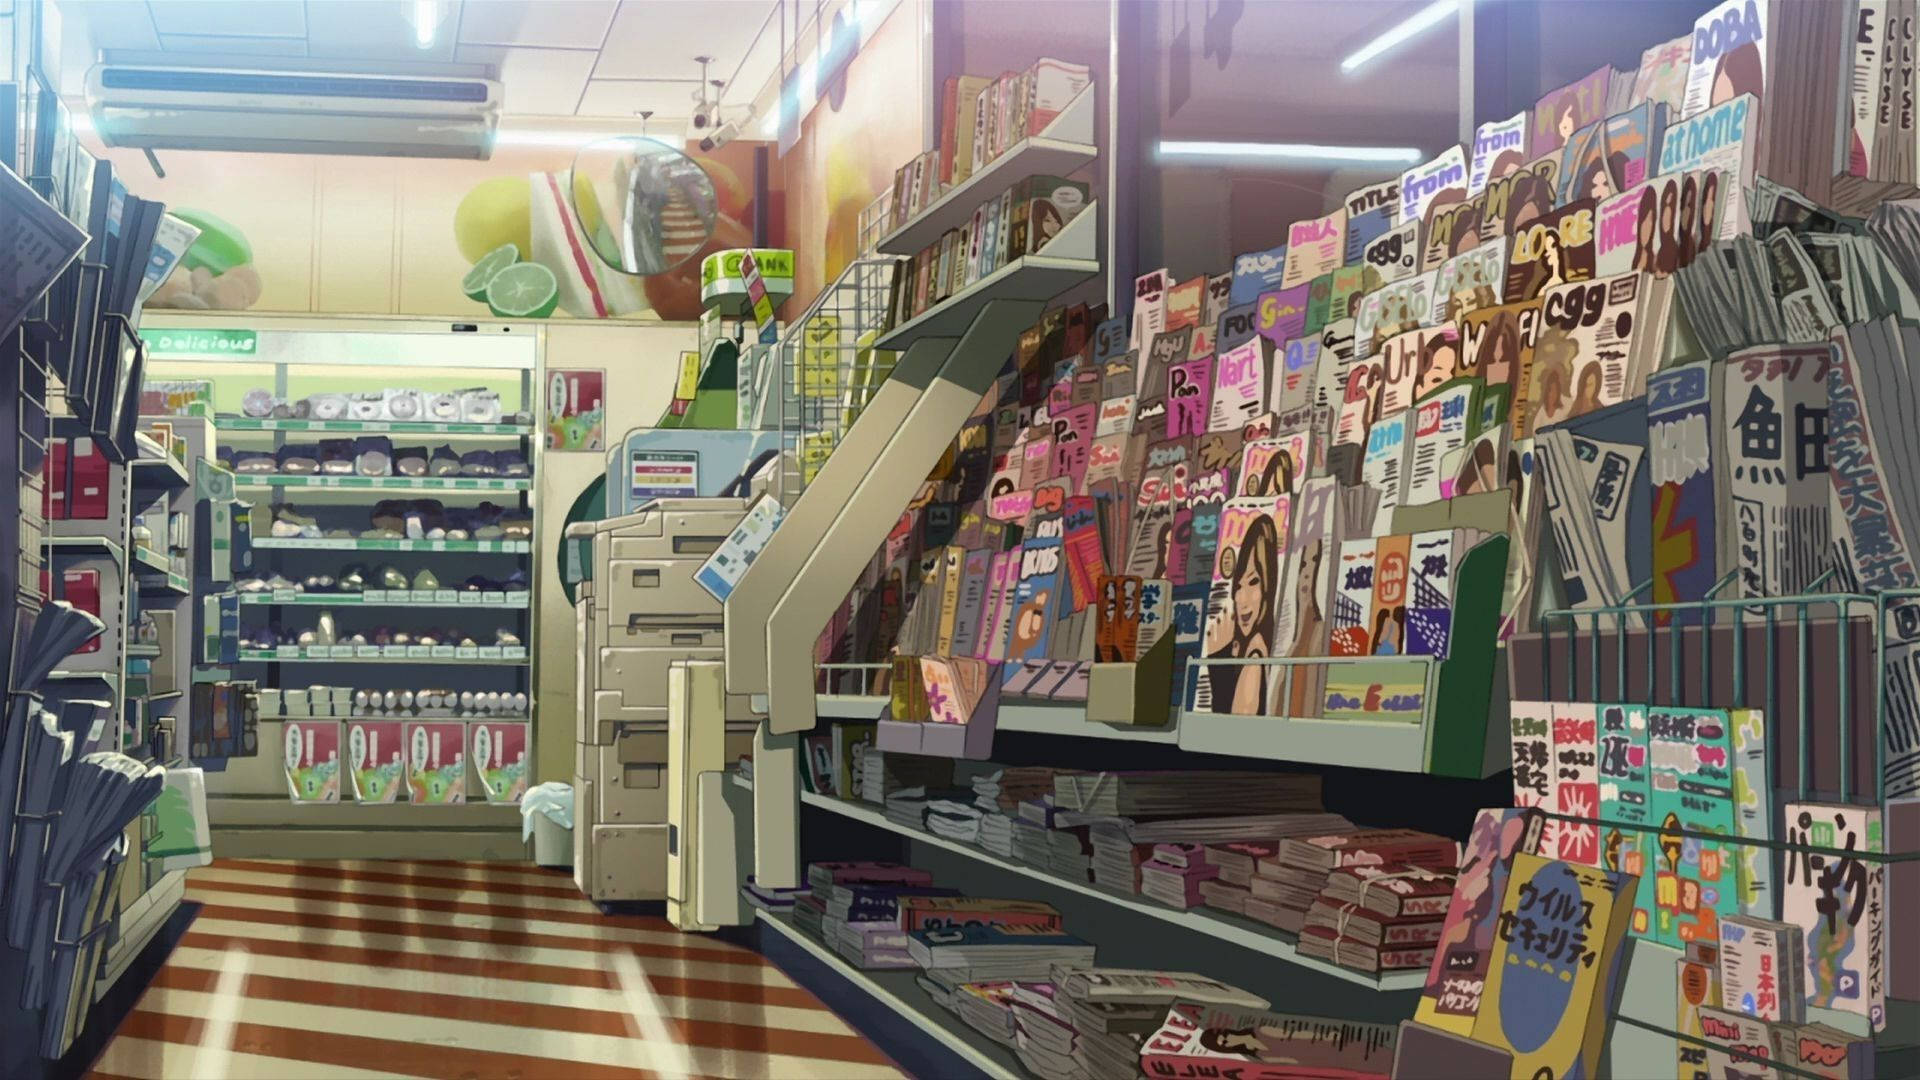 A Bustling Anime Grocery Store Filled With Varieties Of Fresh Produce And Goods. Background